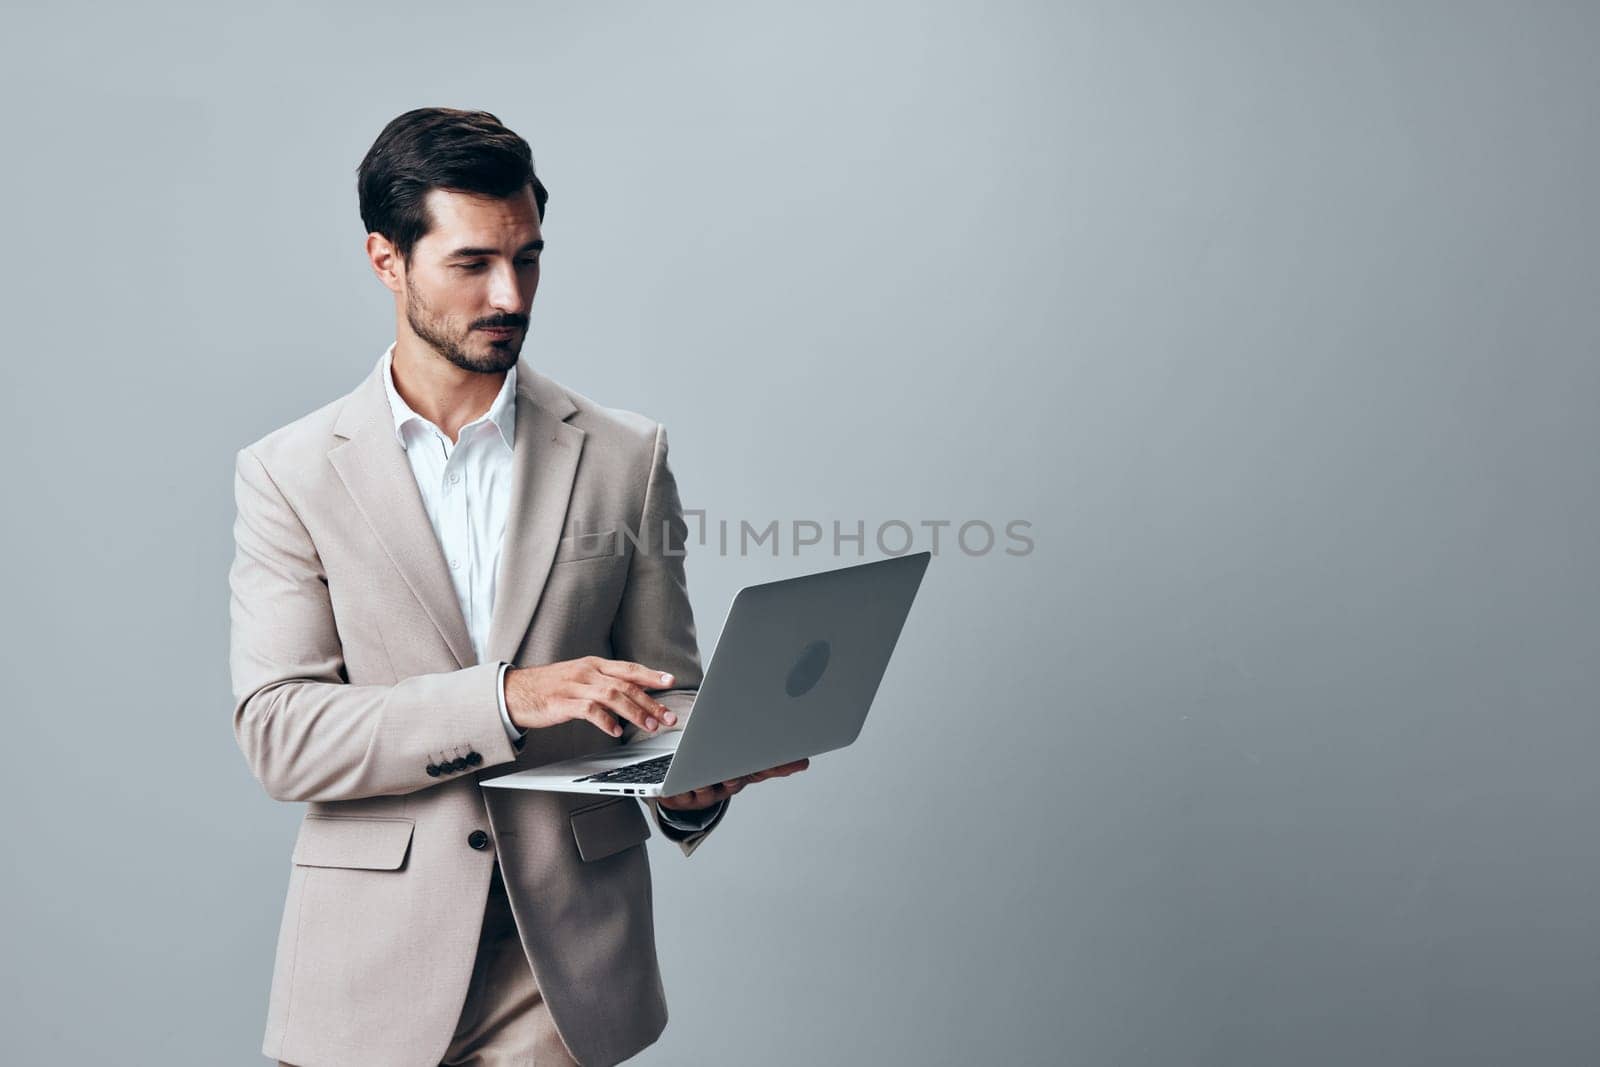 man young smiling computer stylish freelancer online internet suit adult male cyberspace person beige professional laptop using copyspace job wireless business